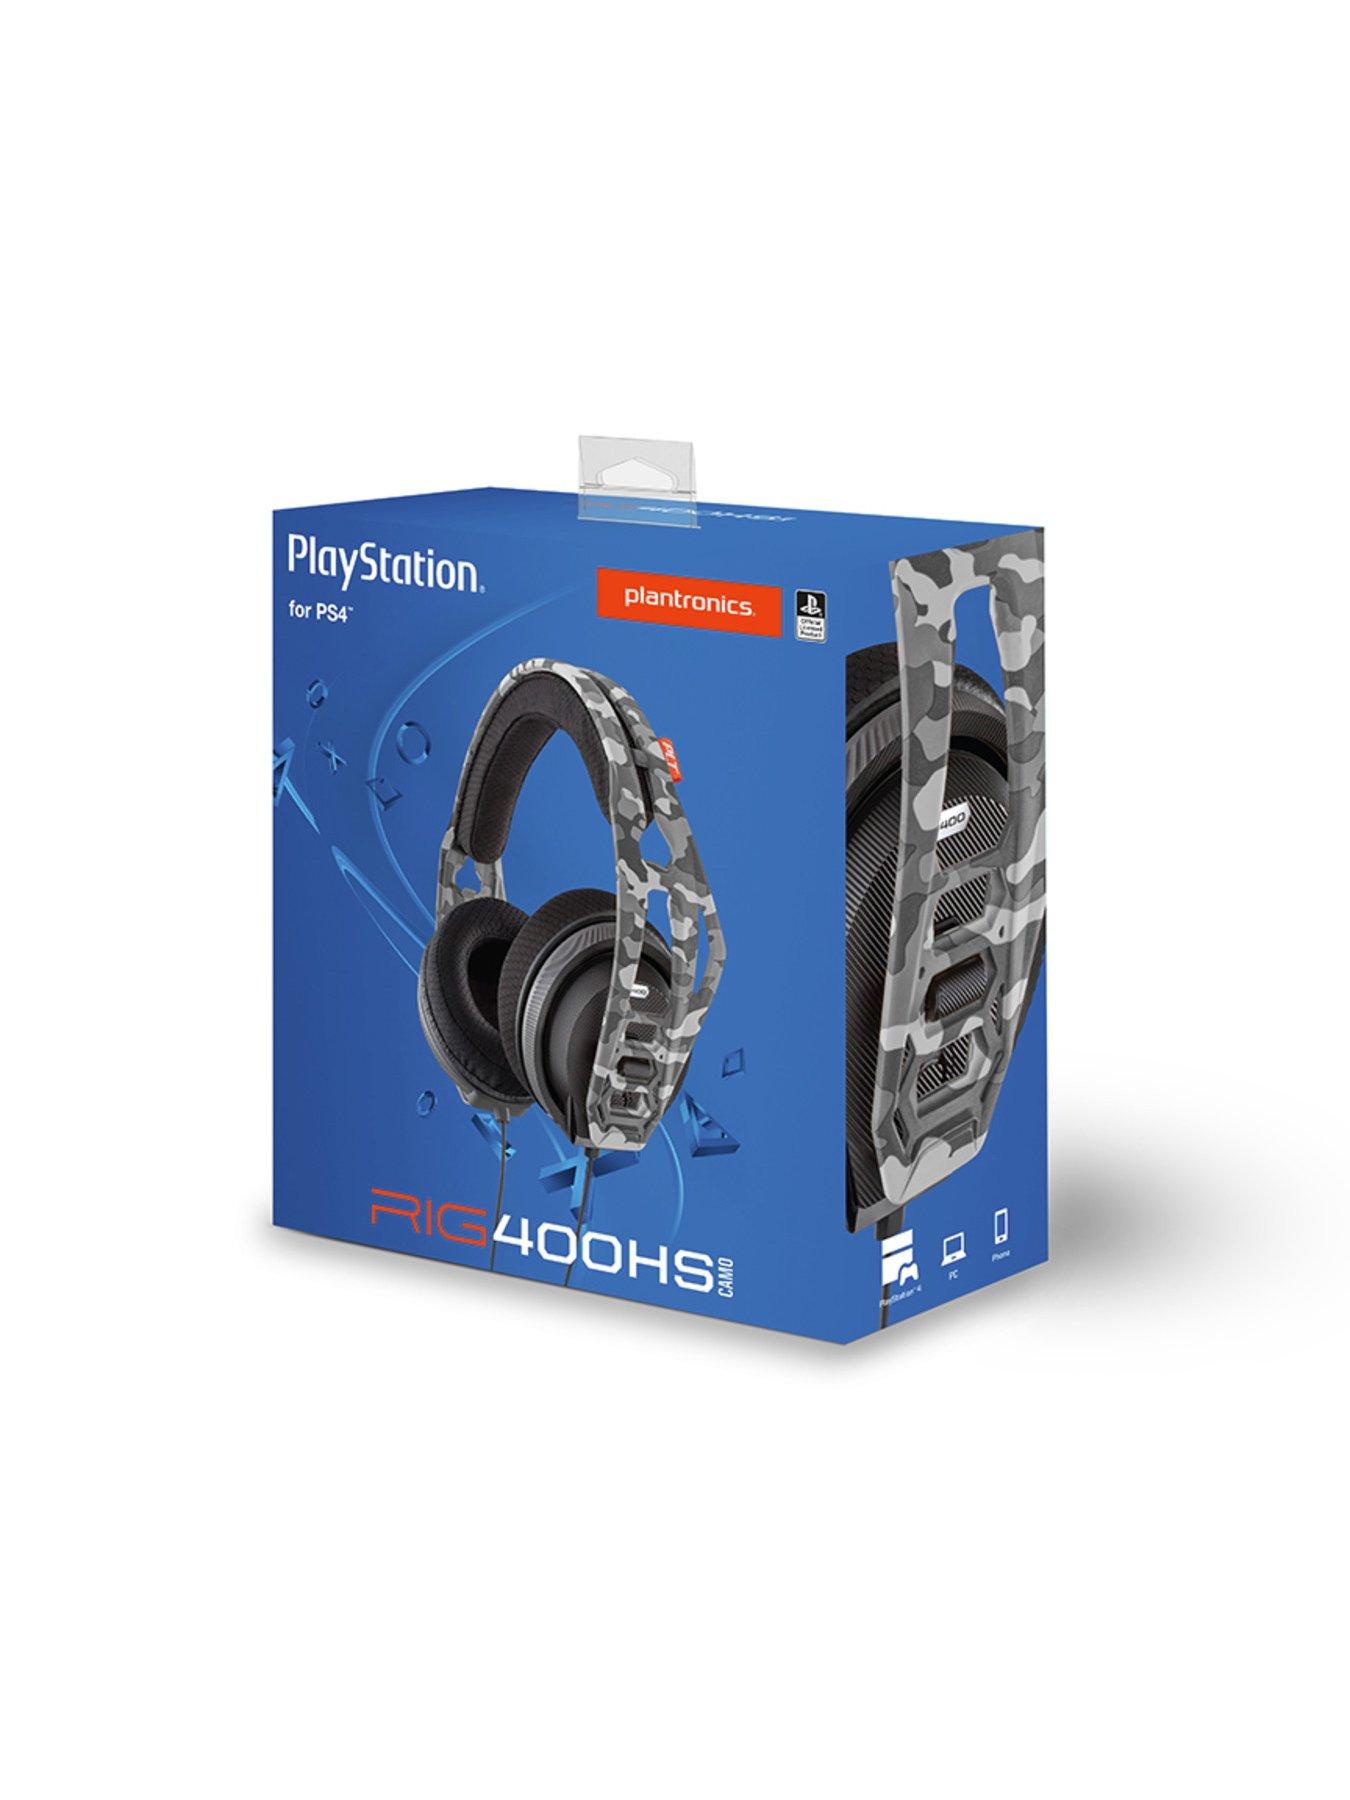 rig 400hs camo stereo gaming headset for playstation 4